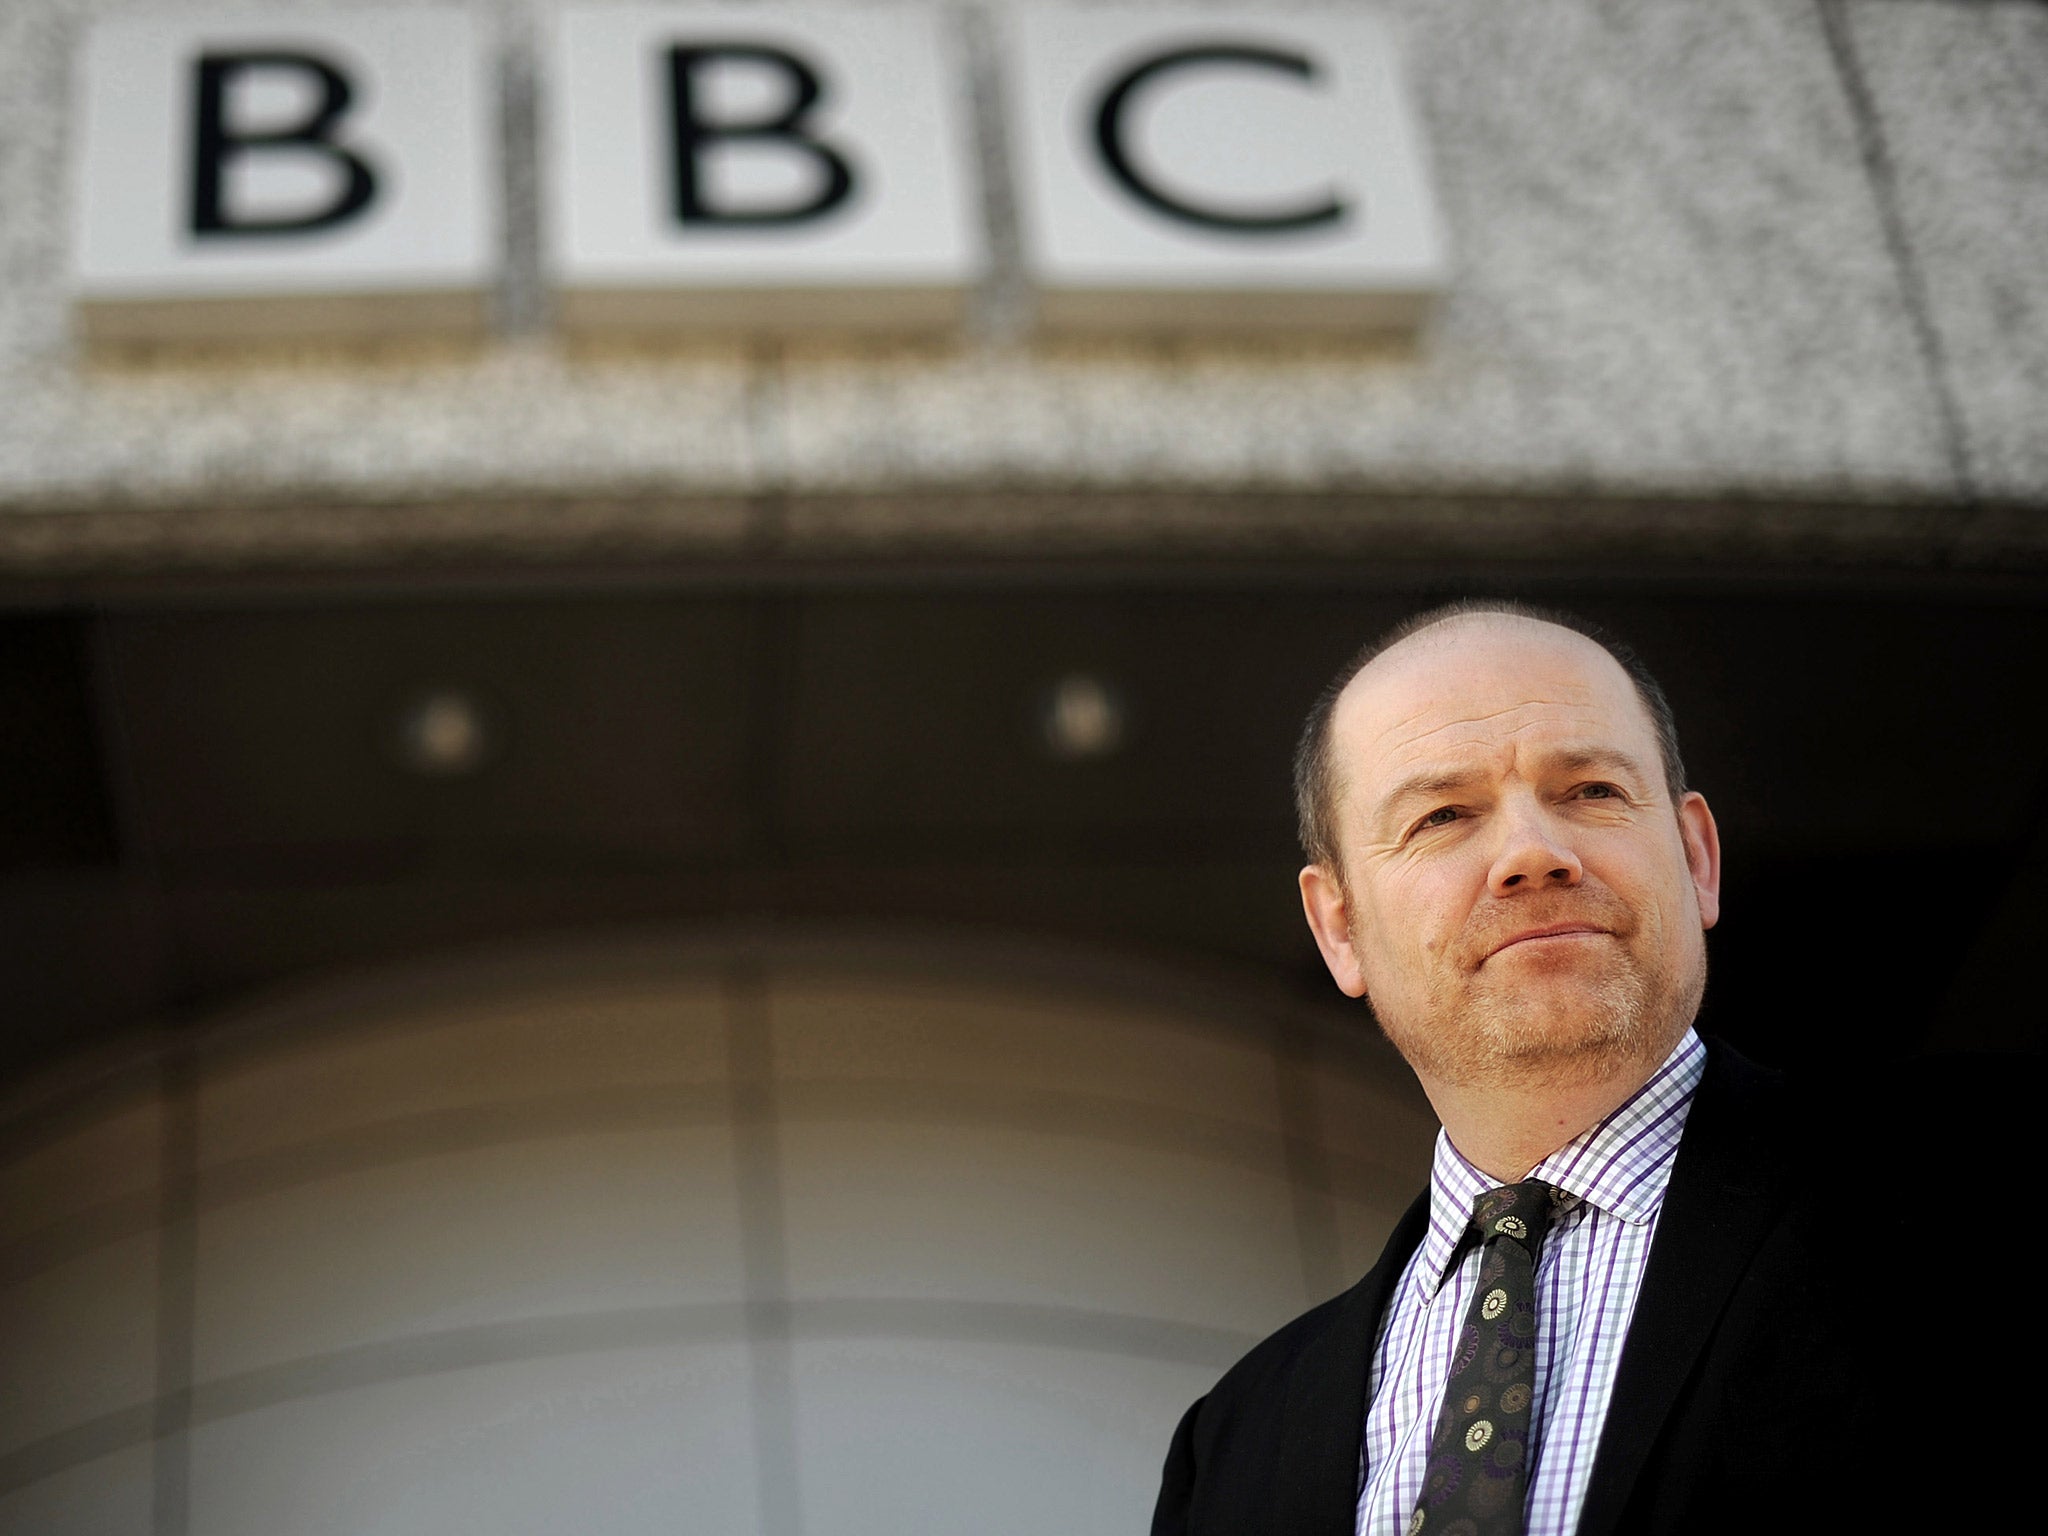 The former BBC Director-General Mark Thompson, who left to become chief executive of the New York Times Company, was head at the time of the doomed IT project